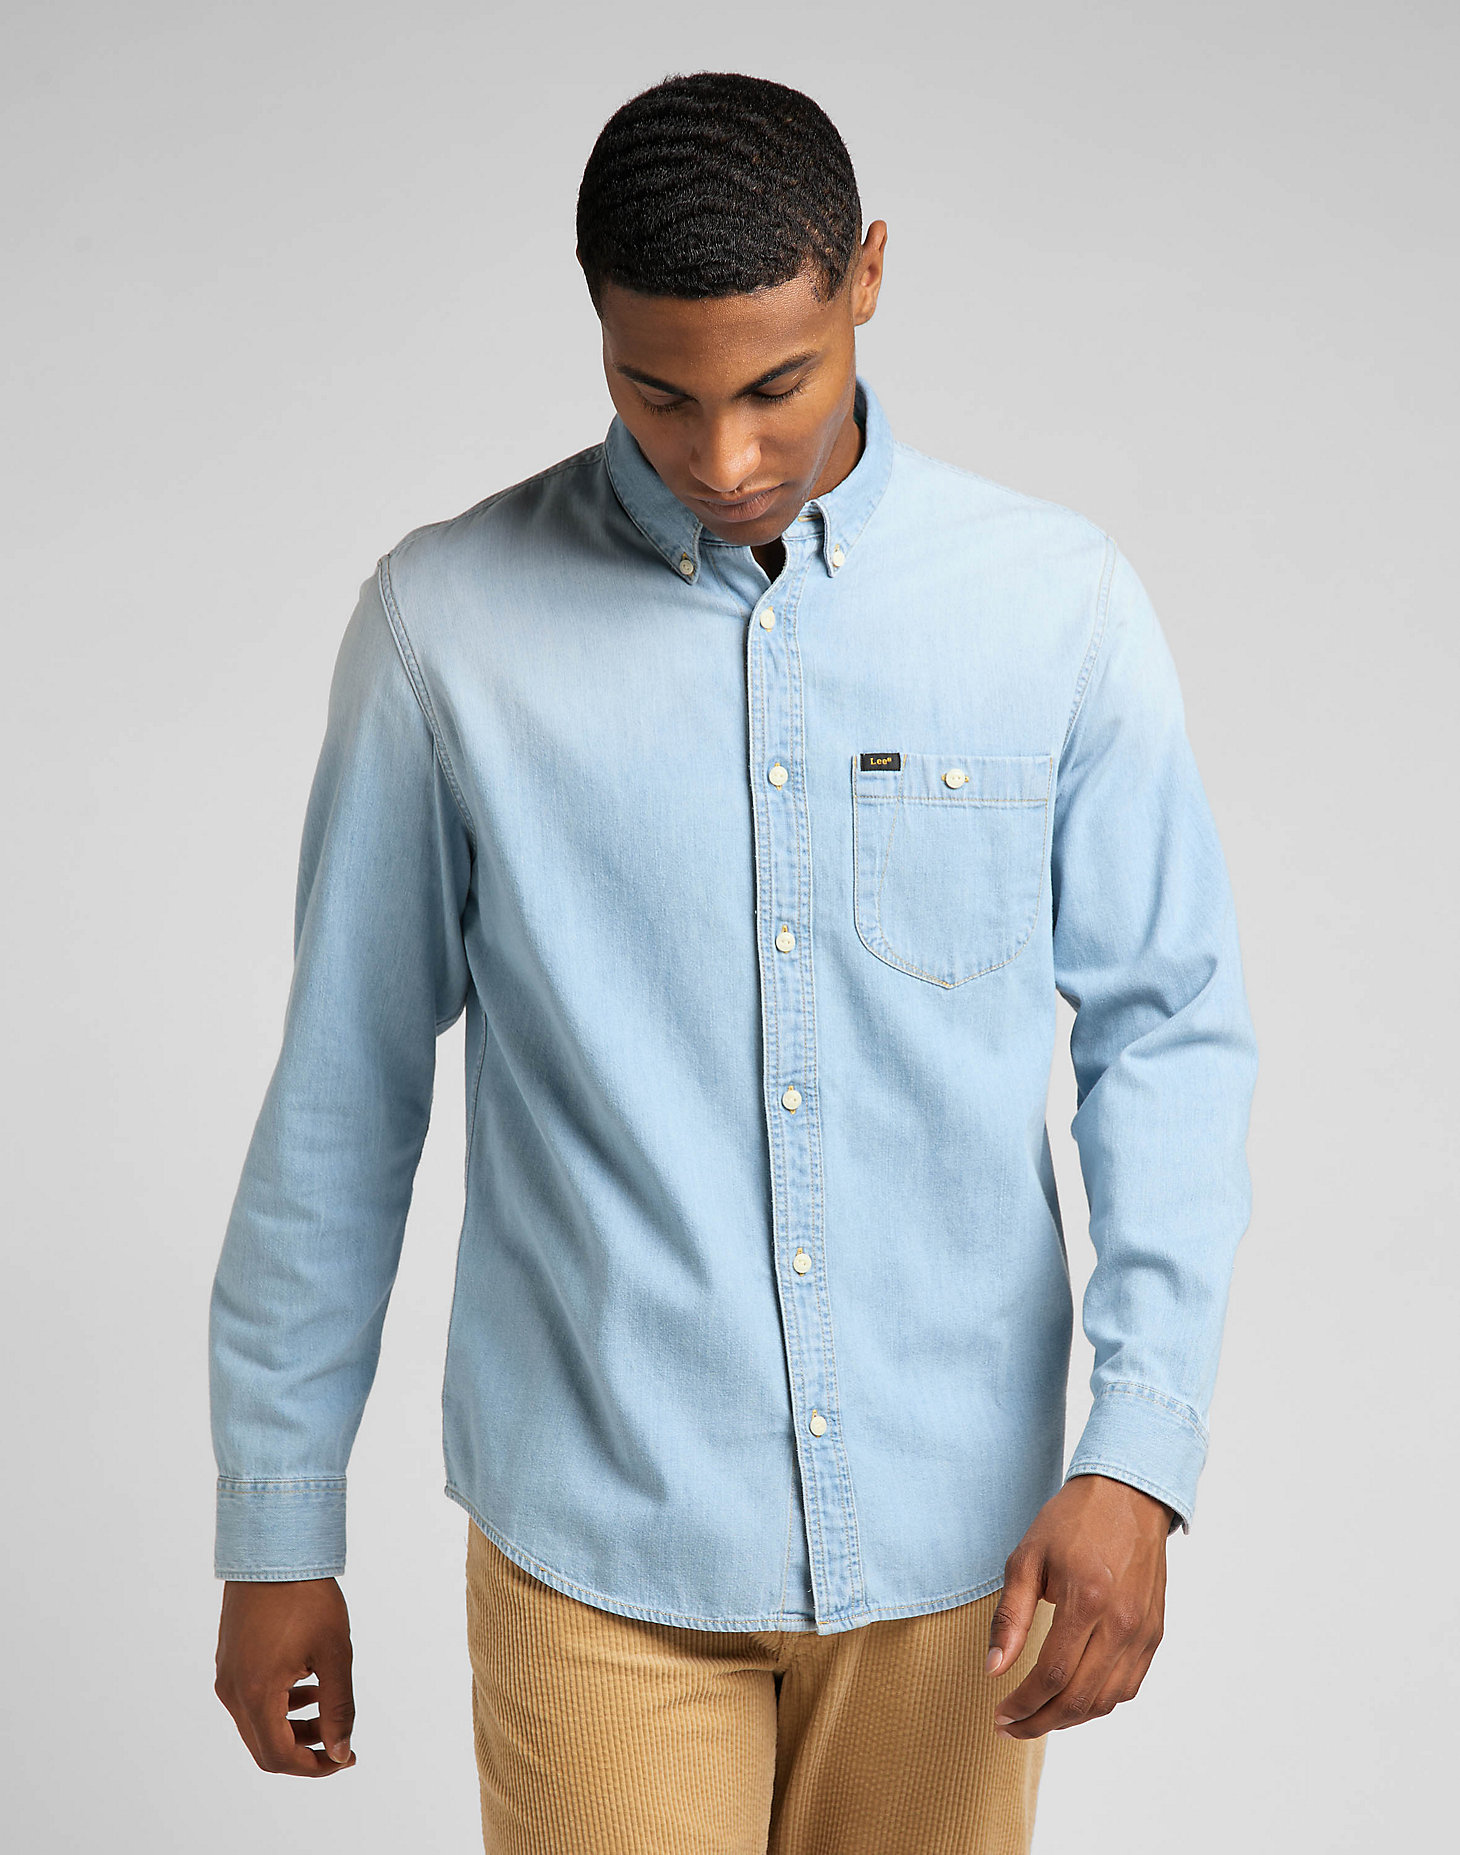 Riveted Shirt in Space Blue main view